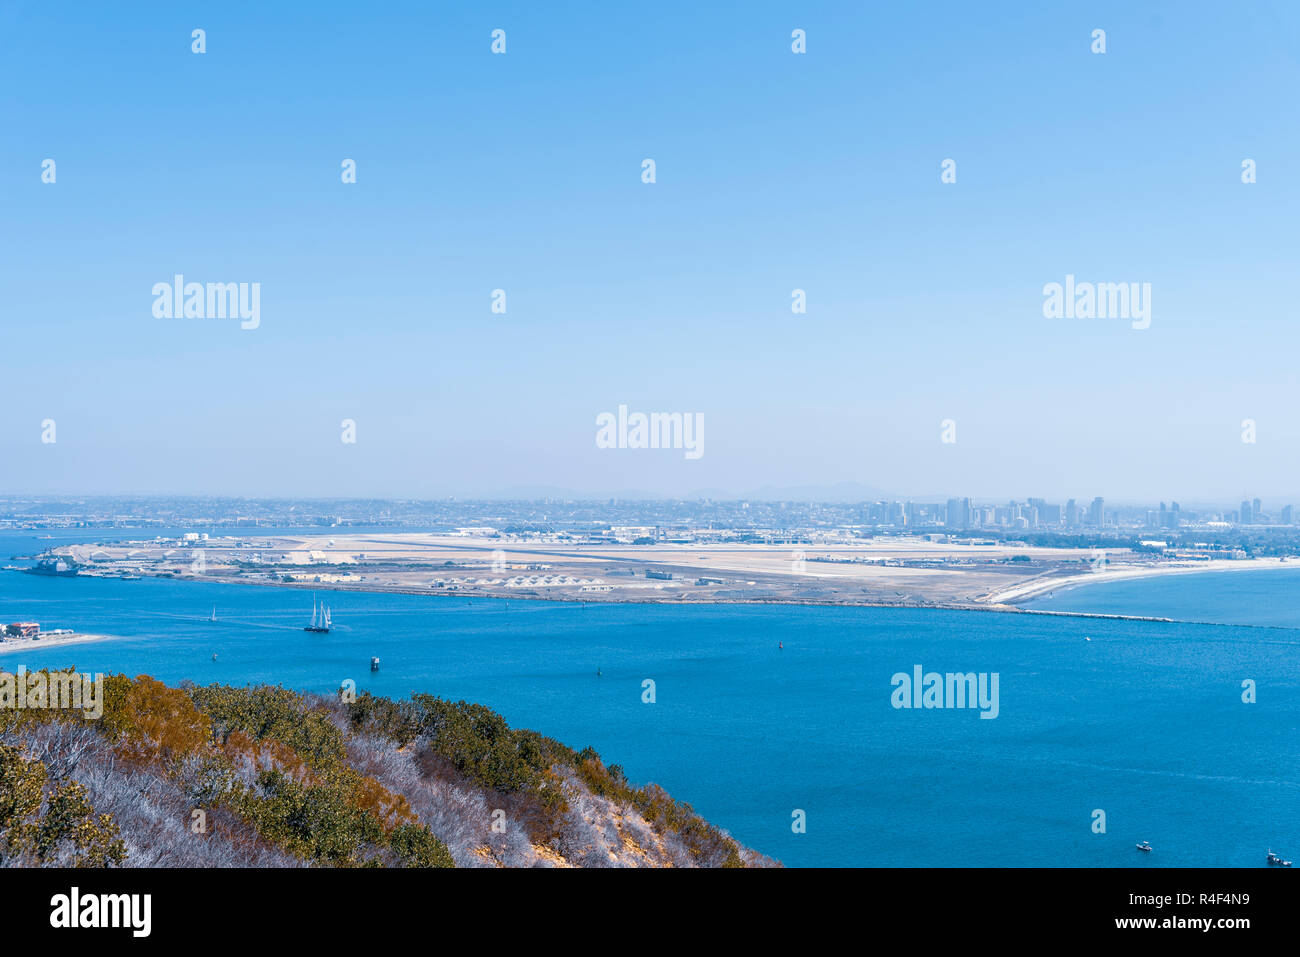 Over looking San Diego Bay from the top of Point Loma; Coronado island in background, ocean bay under a hazy blue sky. Stock Photo